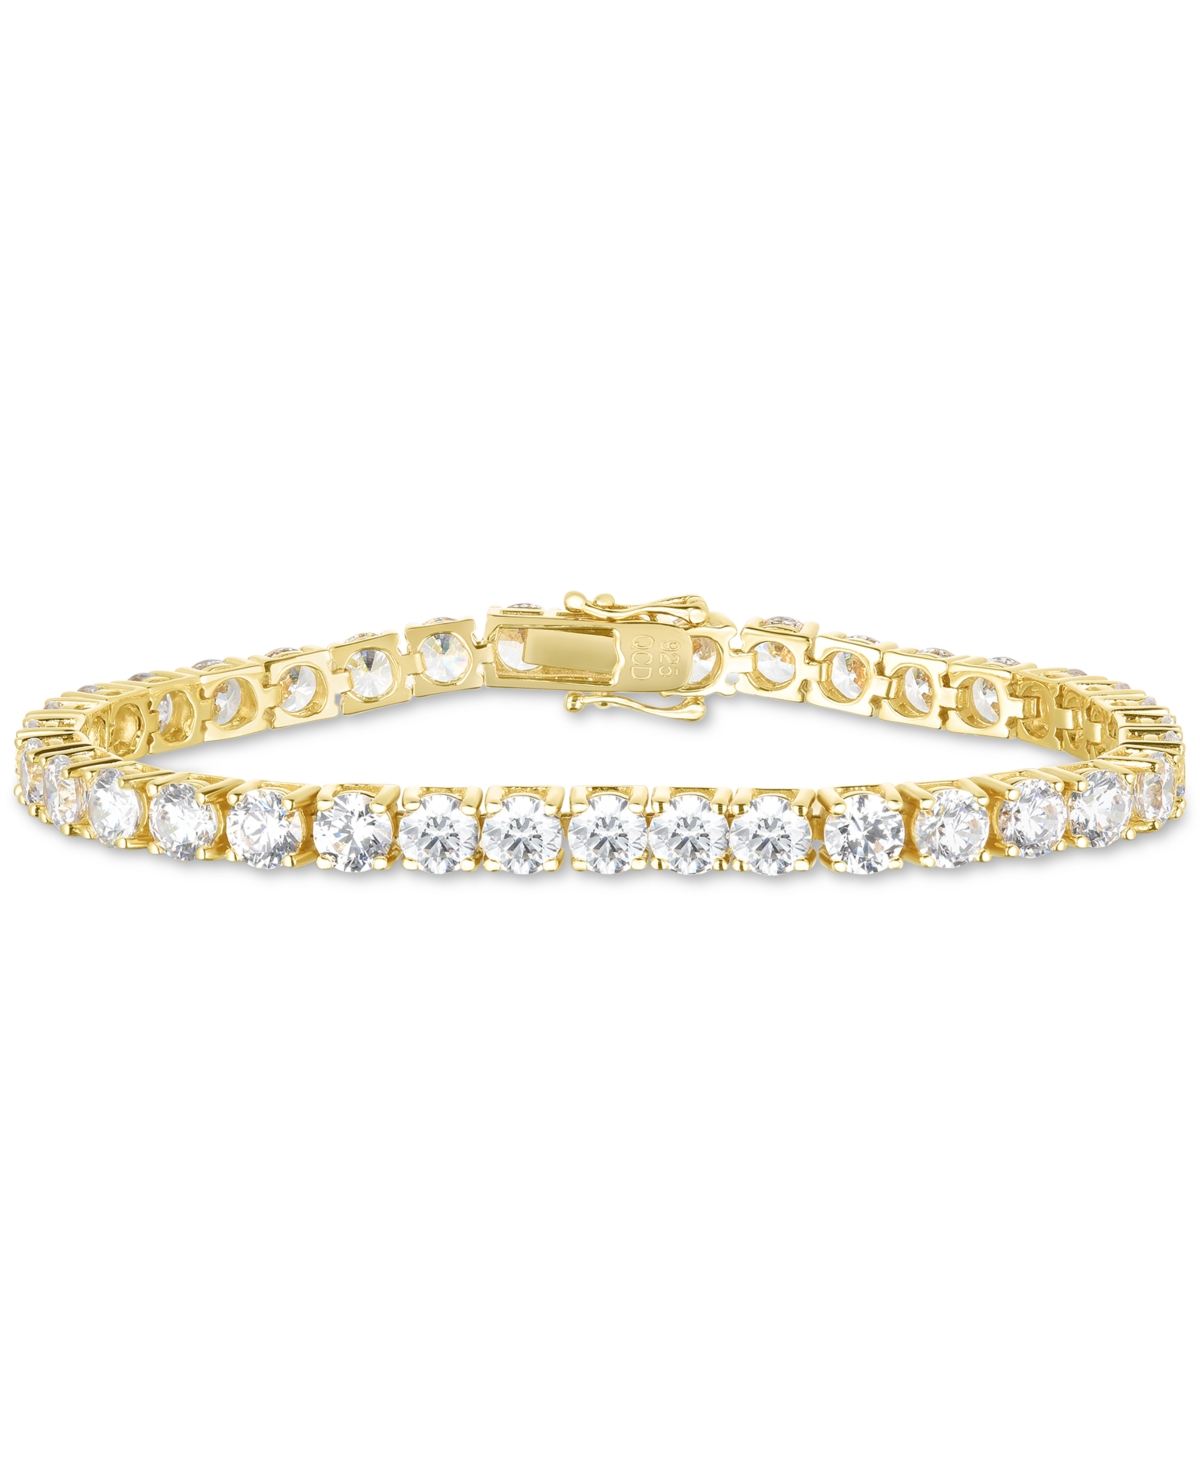 Cubic Zirconia Link Bracelet in 18k Gold-Plated Sterling Silver - Yellow Gold